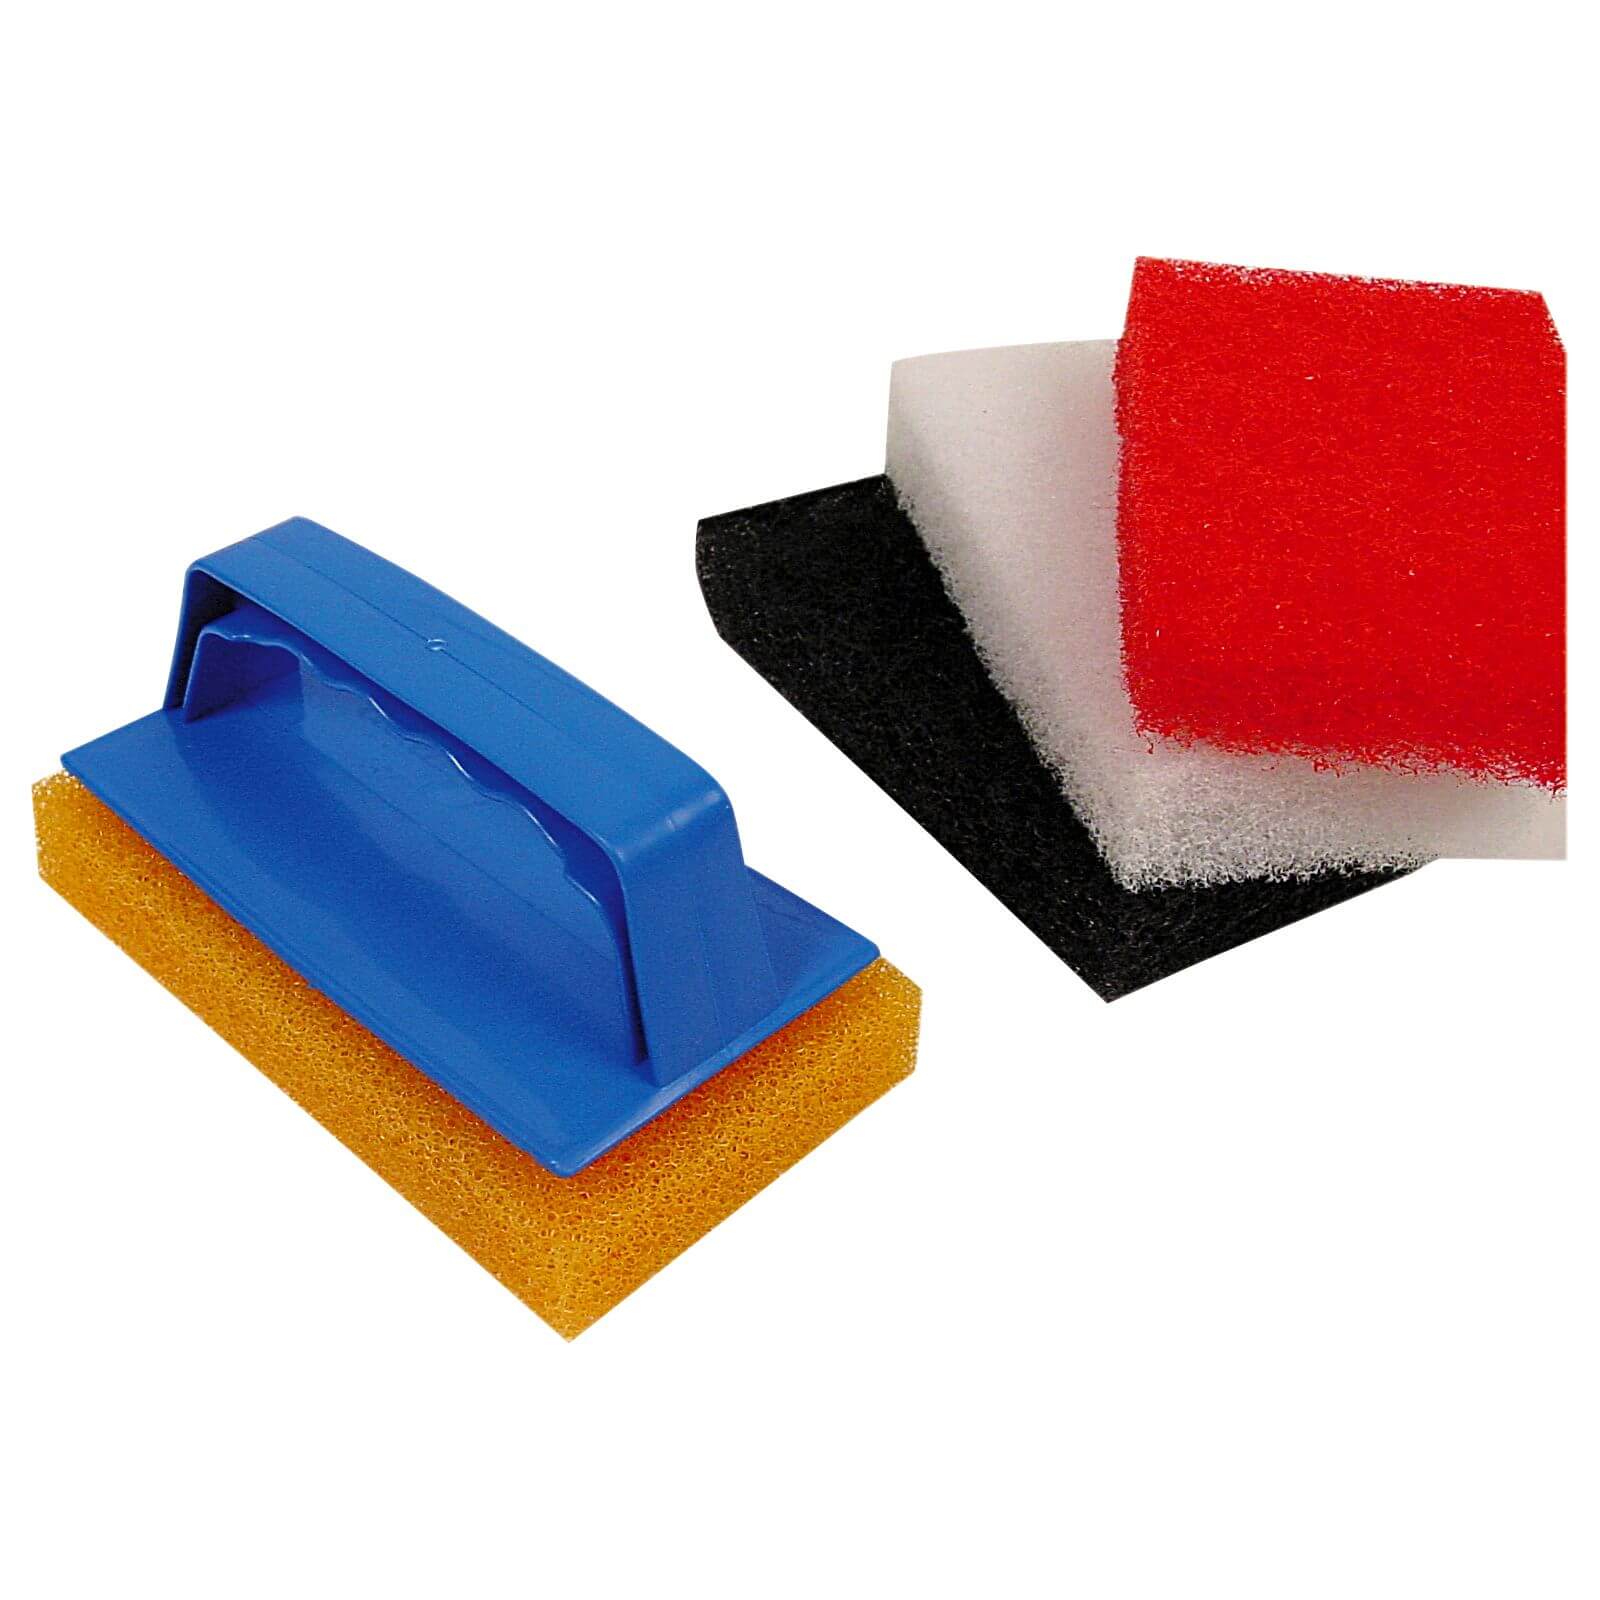 Vitrex Grout Clean-Up And Polishing Kit